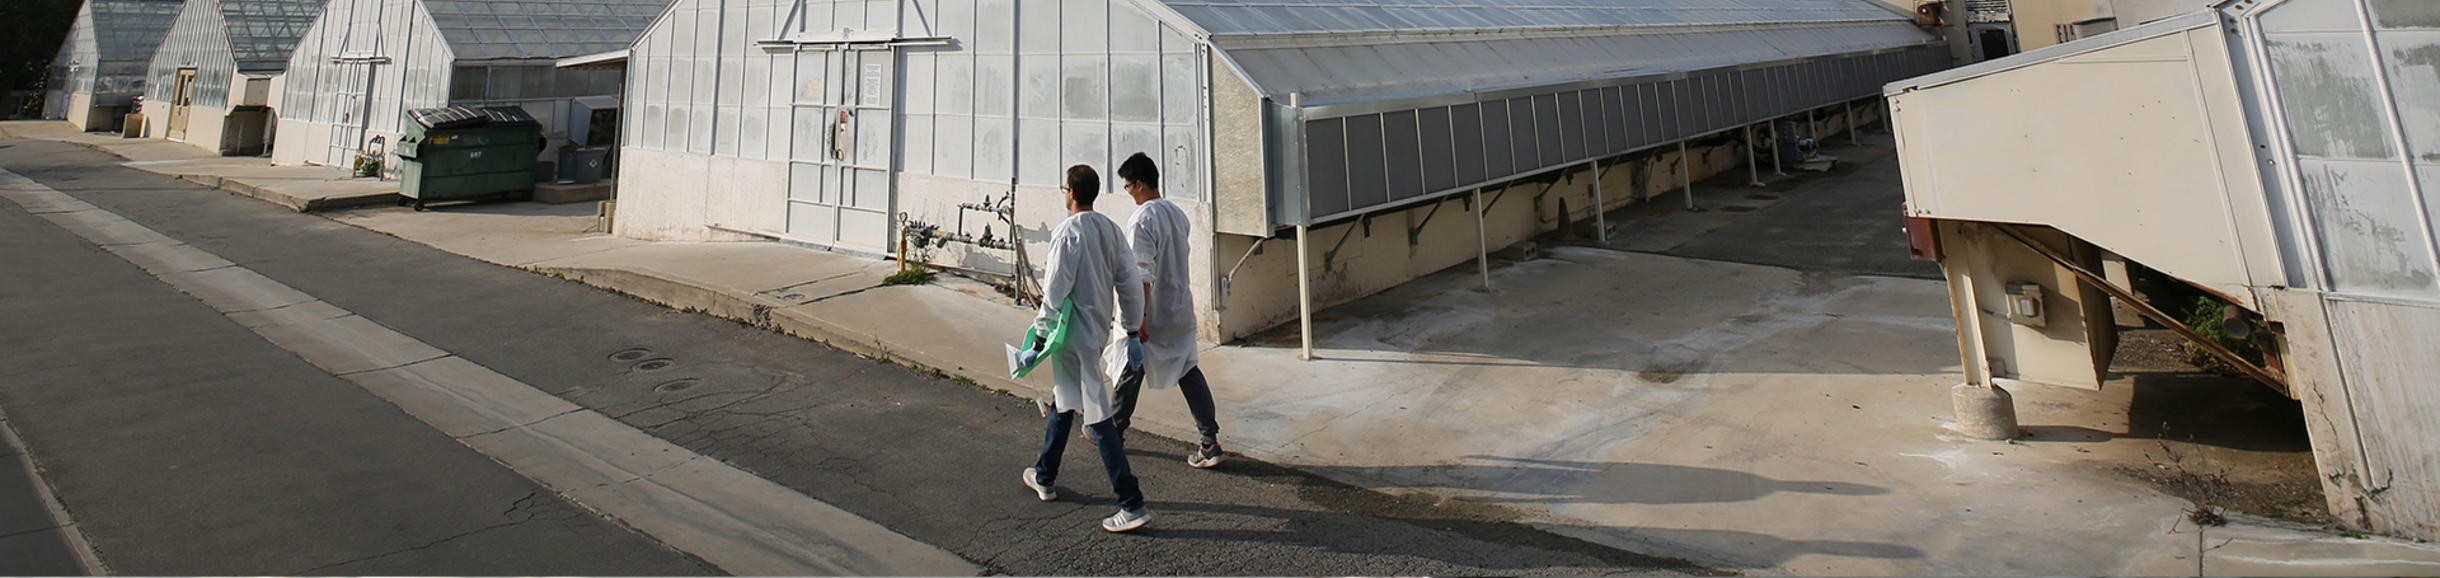 students walking in front of greenhouses